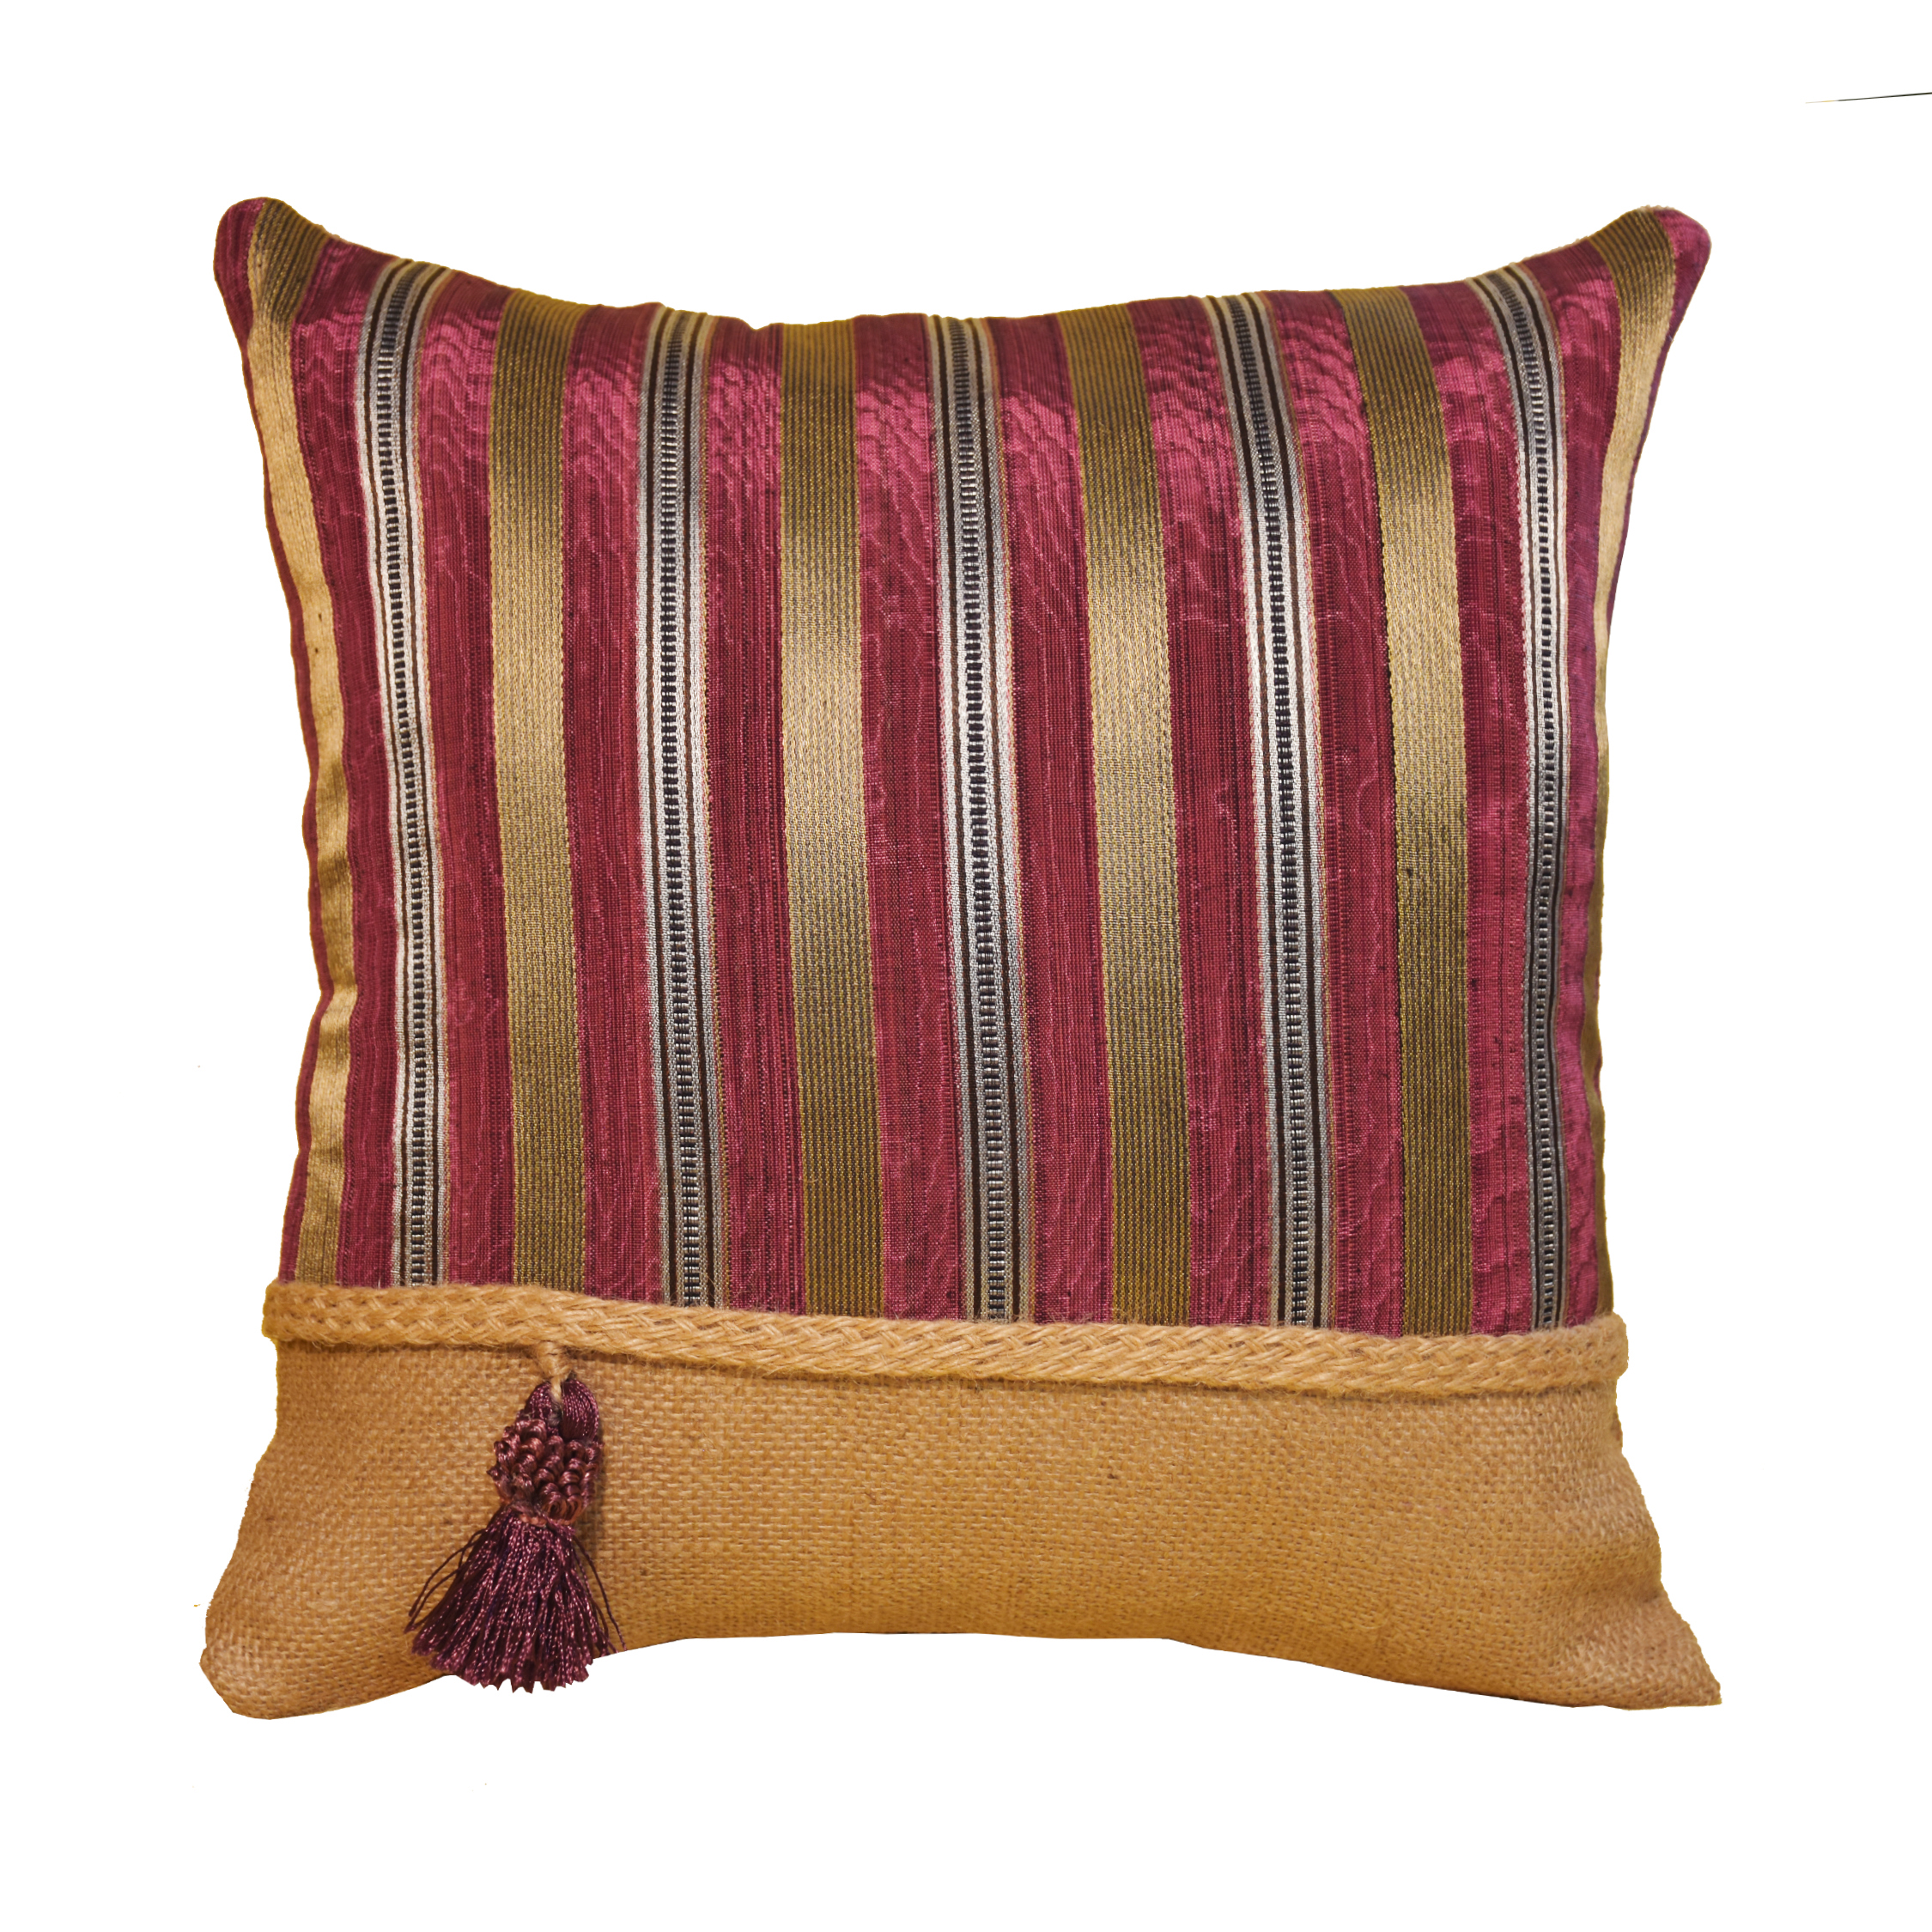  Coussin textile traditionnel Syrien